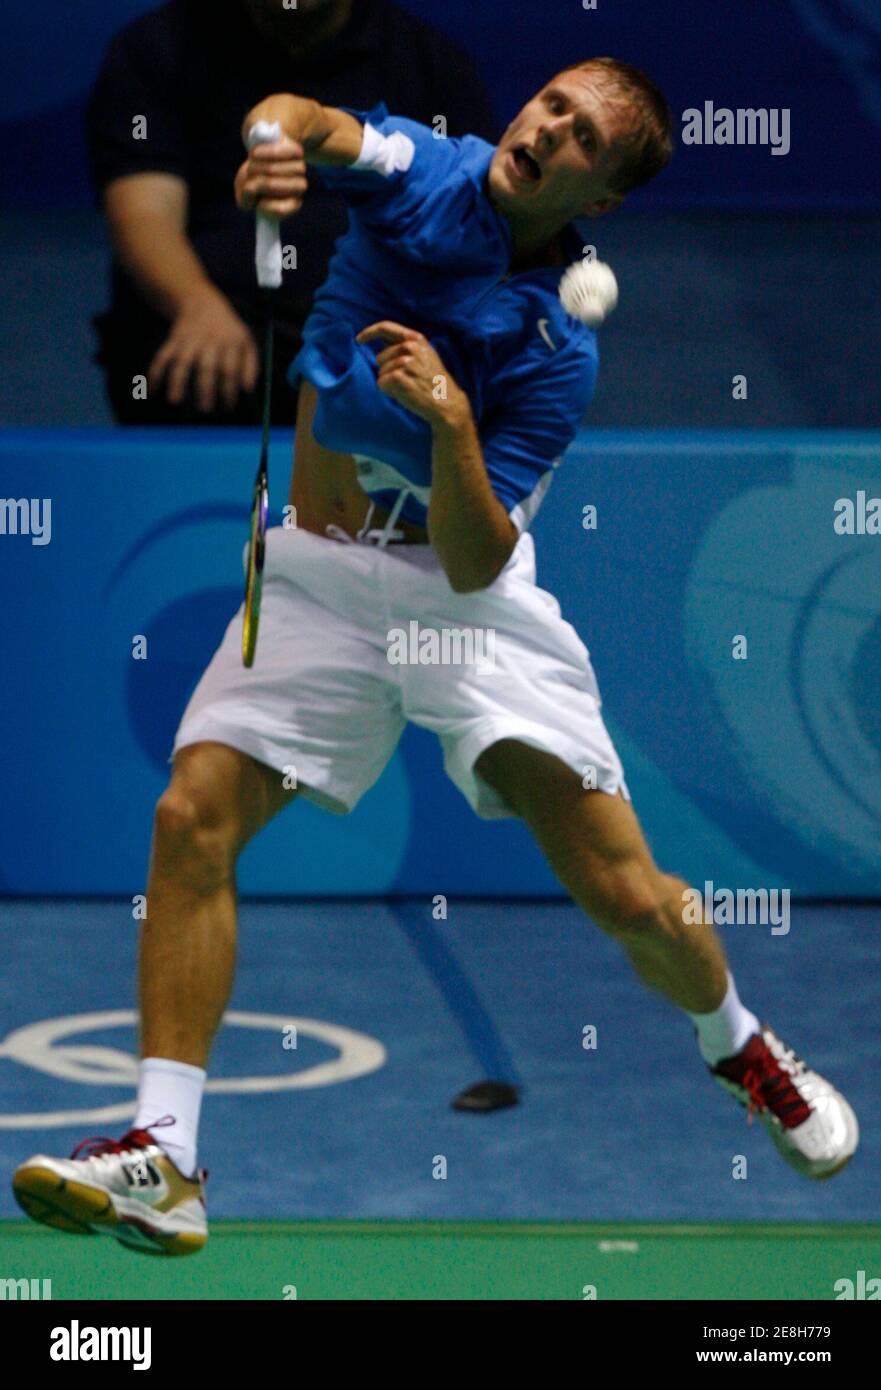 Raul Must of Estonia plays a shot to Przemyslaw Wacha of Poland during his men's singles first round badminton match at the Beijing 2008 Olympic Games August 9, 2008.   REUTERS/Beawiharta (CHINA) Stock Photo